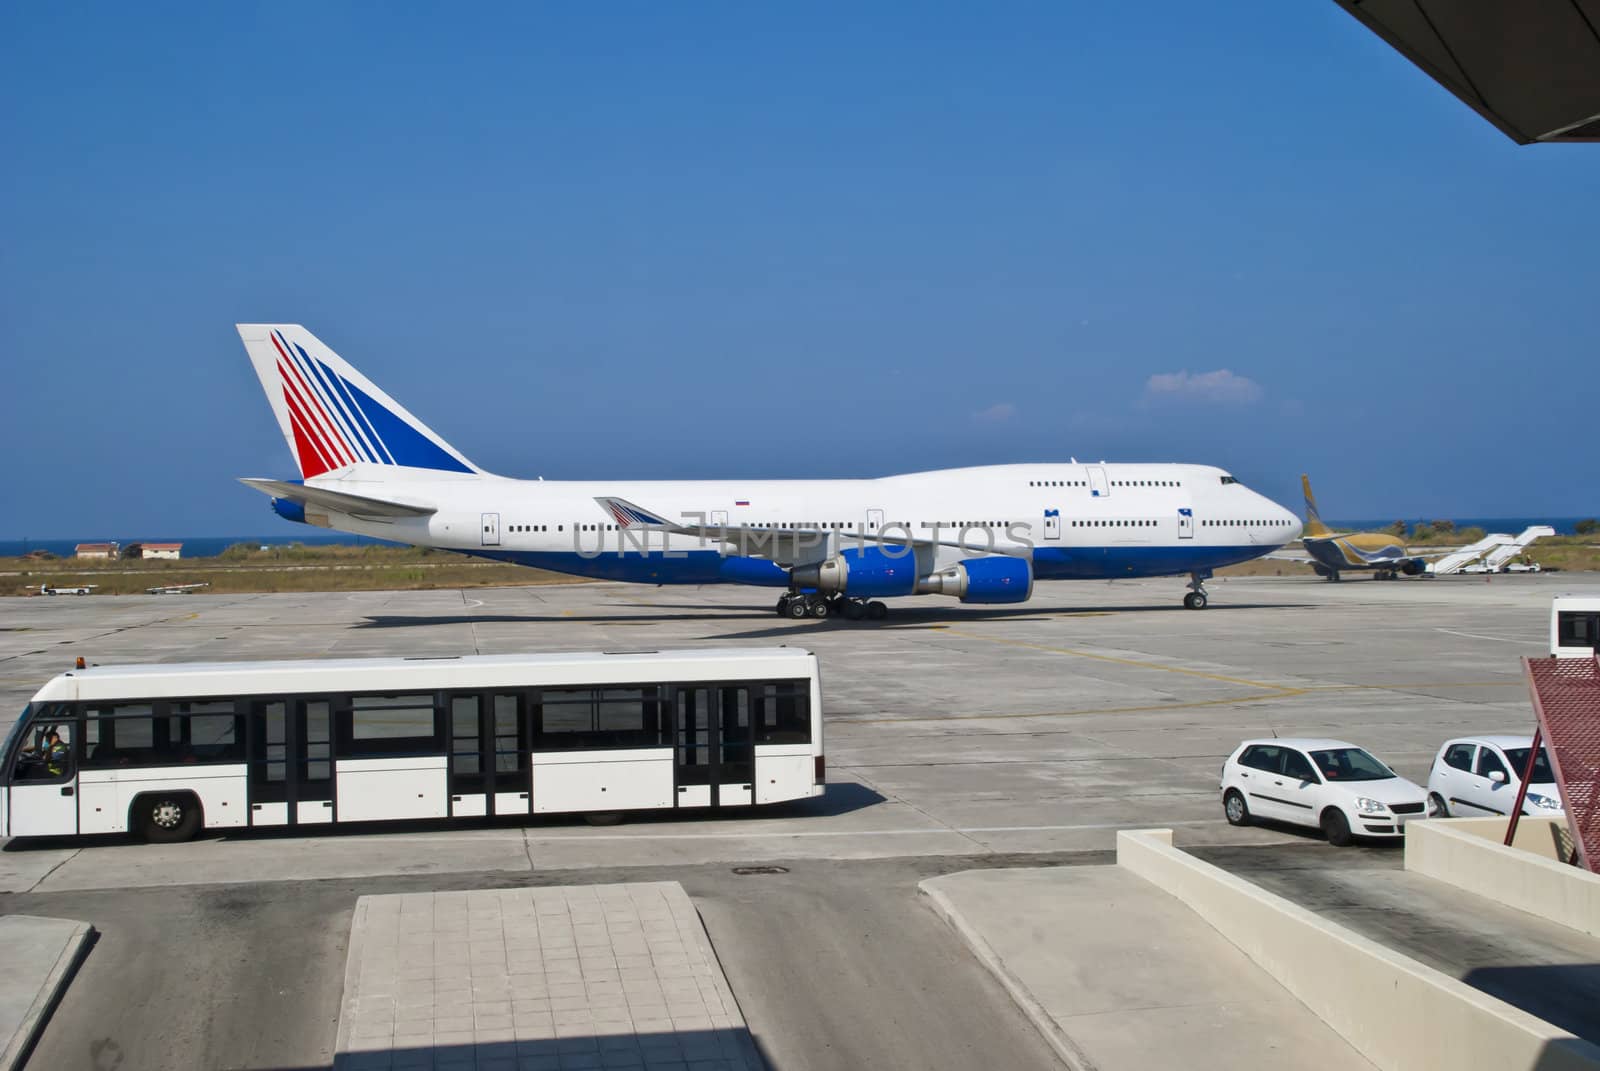 Boeing 747, also known by the nickname Jumbojet, is the world's second largest passenger aircraft after Airbus A380. Picture are shot from the departure hall at Rhodes airport. 